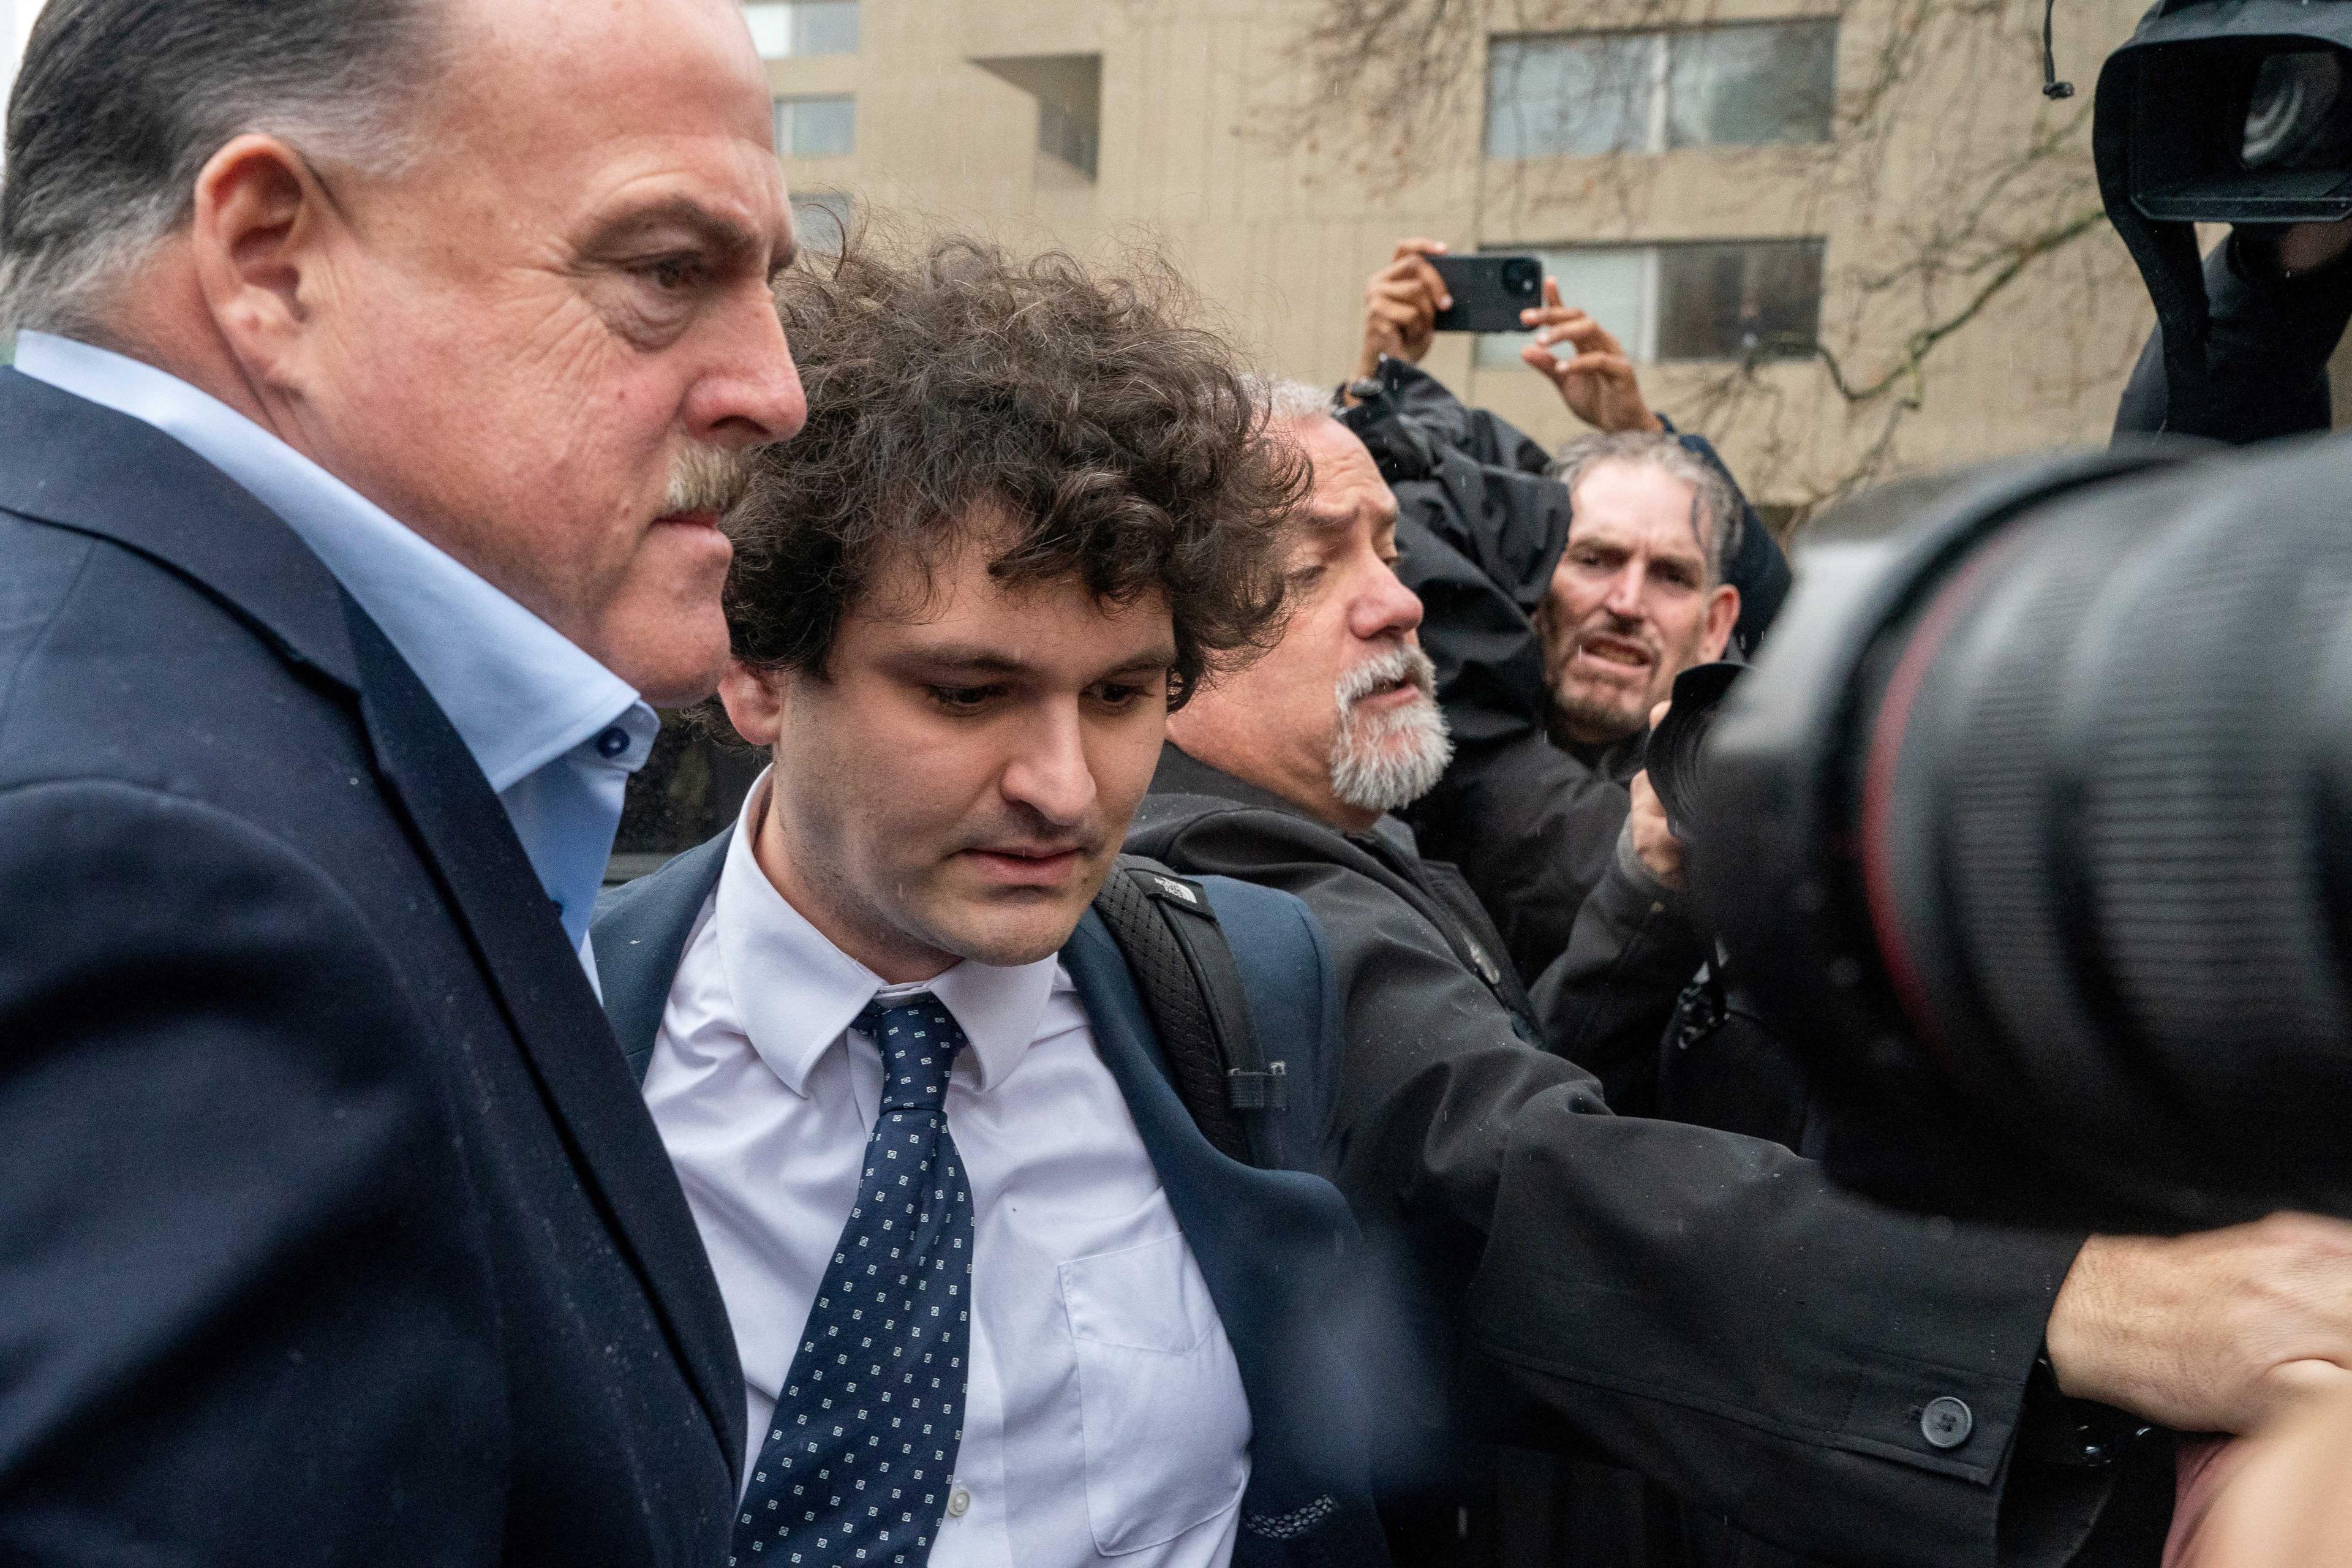 Former FTX Chief Executive Sam Bankman-Fried, who faces fraud charges over the collapse of the bankrupt cryptocurrency exchange, arrives on the day of a hearing at Manhattan federal court in New York City, US Jan 3. Photo: Reuters